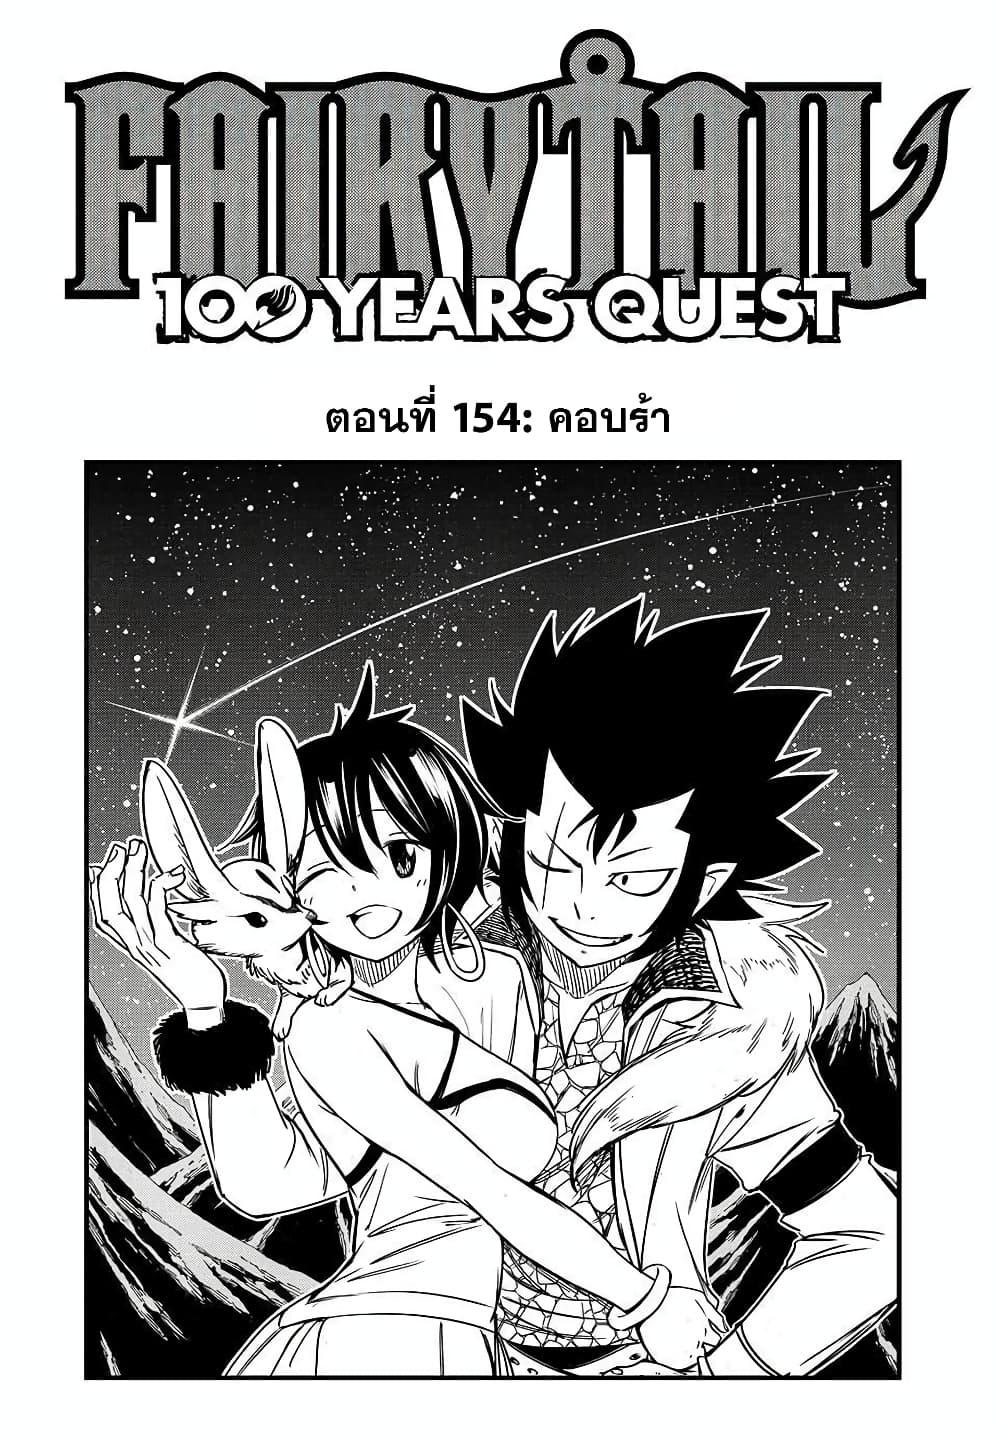 Fairy Tail 100 Years Quest ตอนที่ 154 (1)